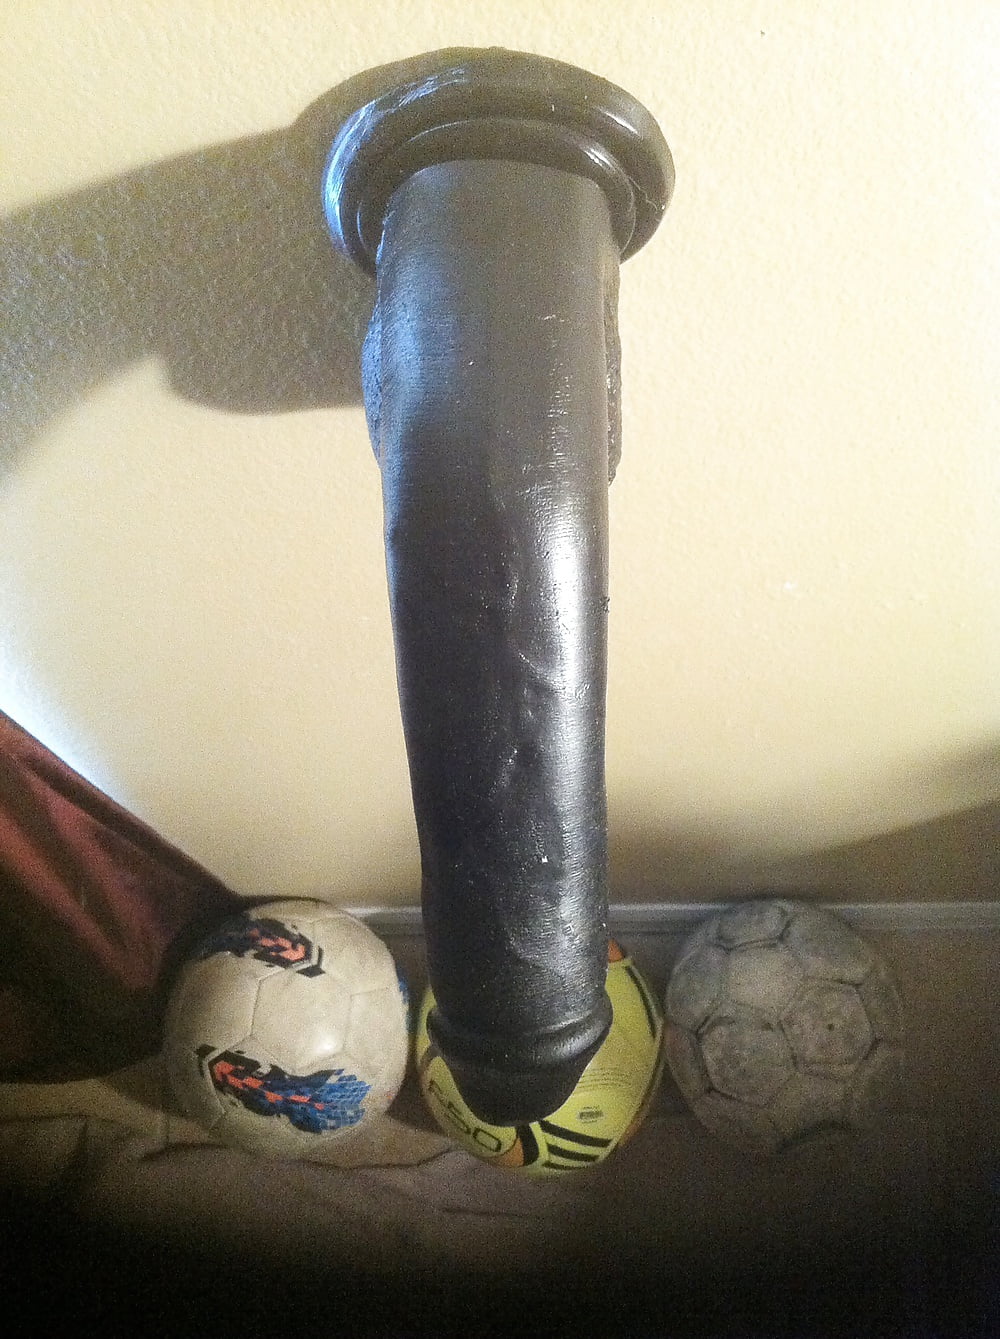 Trying To Gape My Ass 12 Inch Black Dildo 15 Pics Xhamster